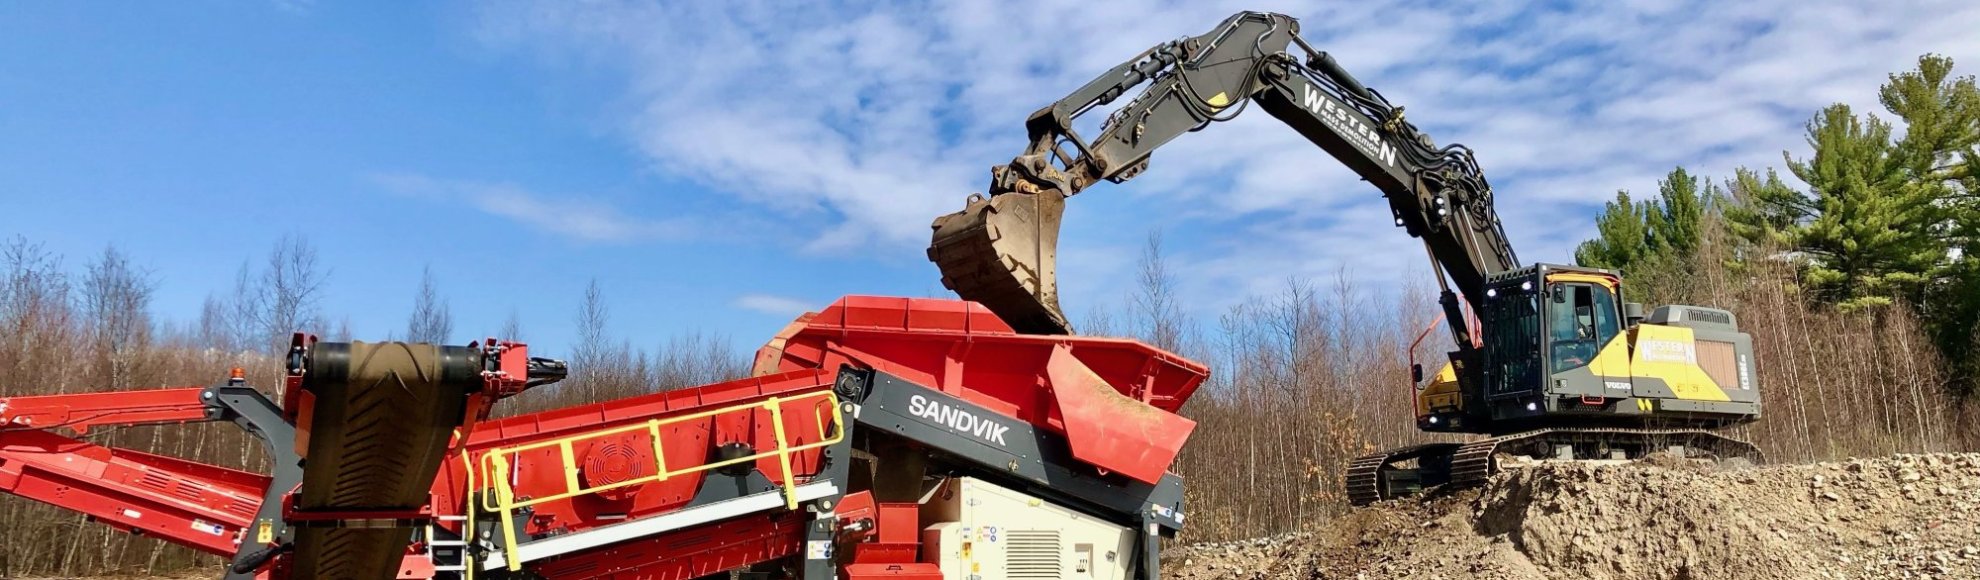 Providing Rock Crushing & Recycling Services In Western MA backgound banner